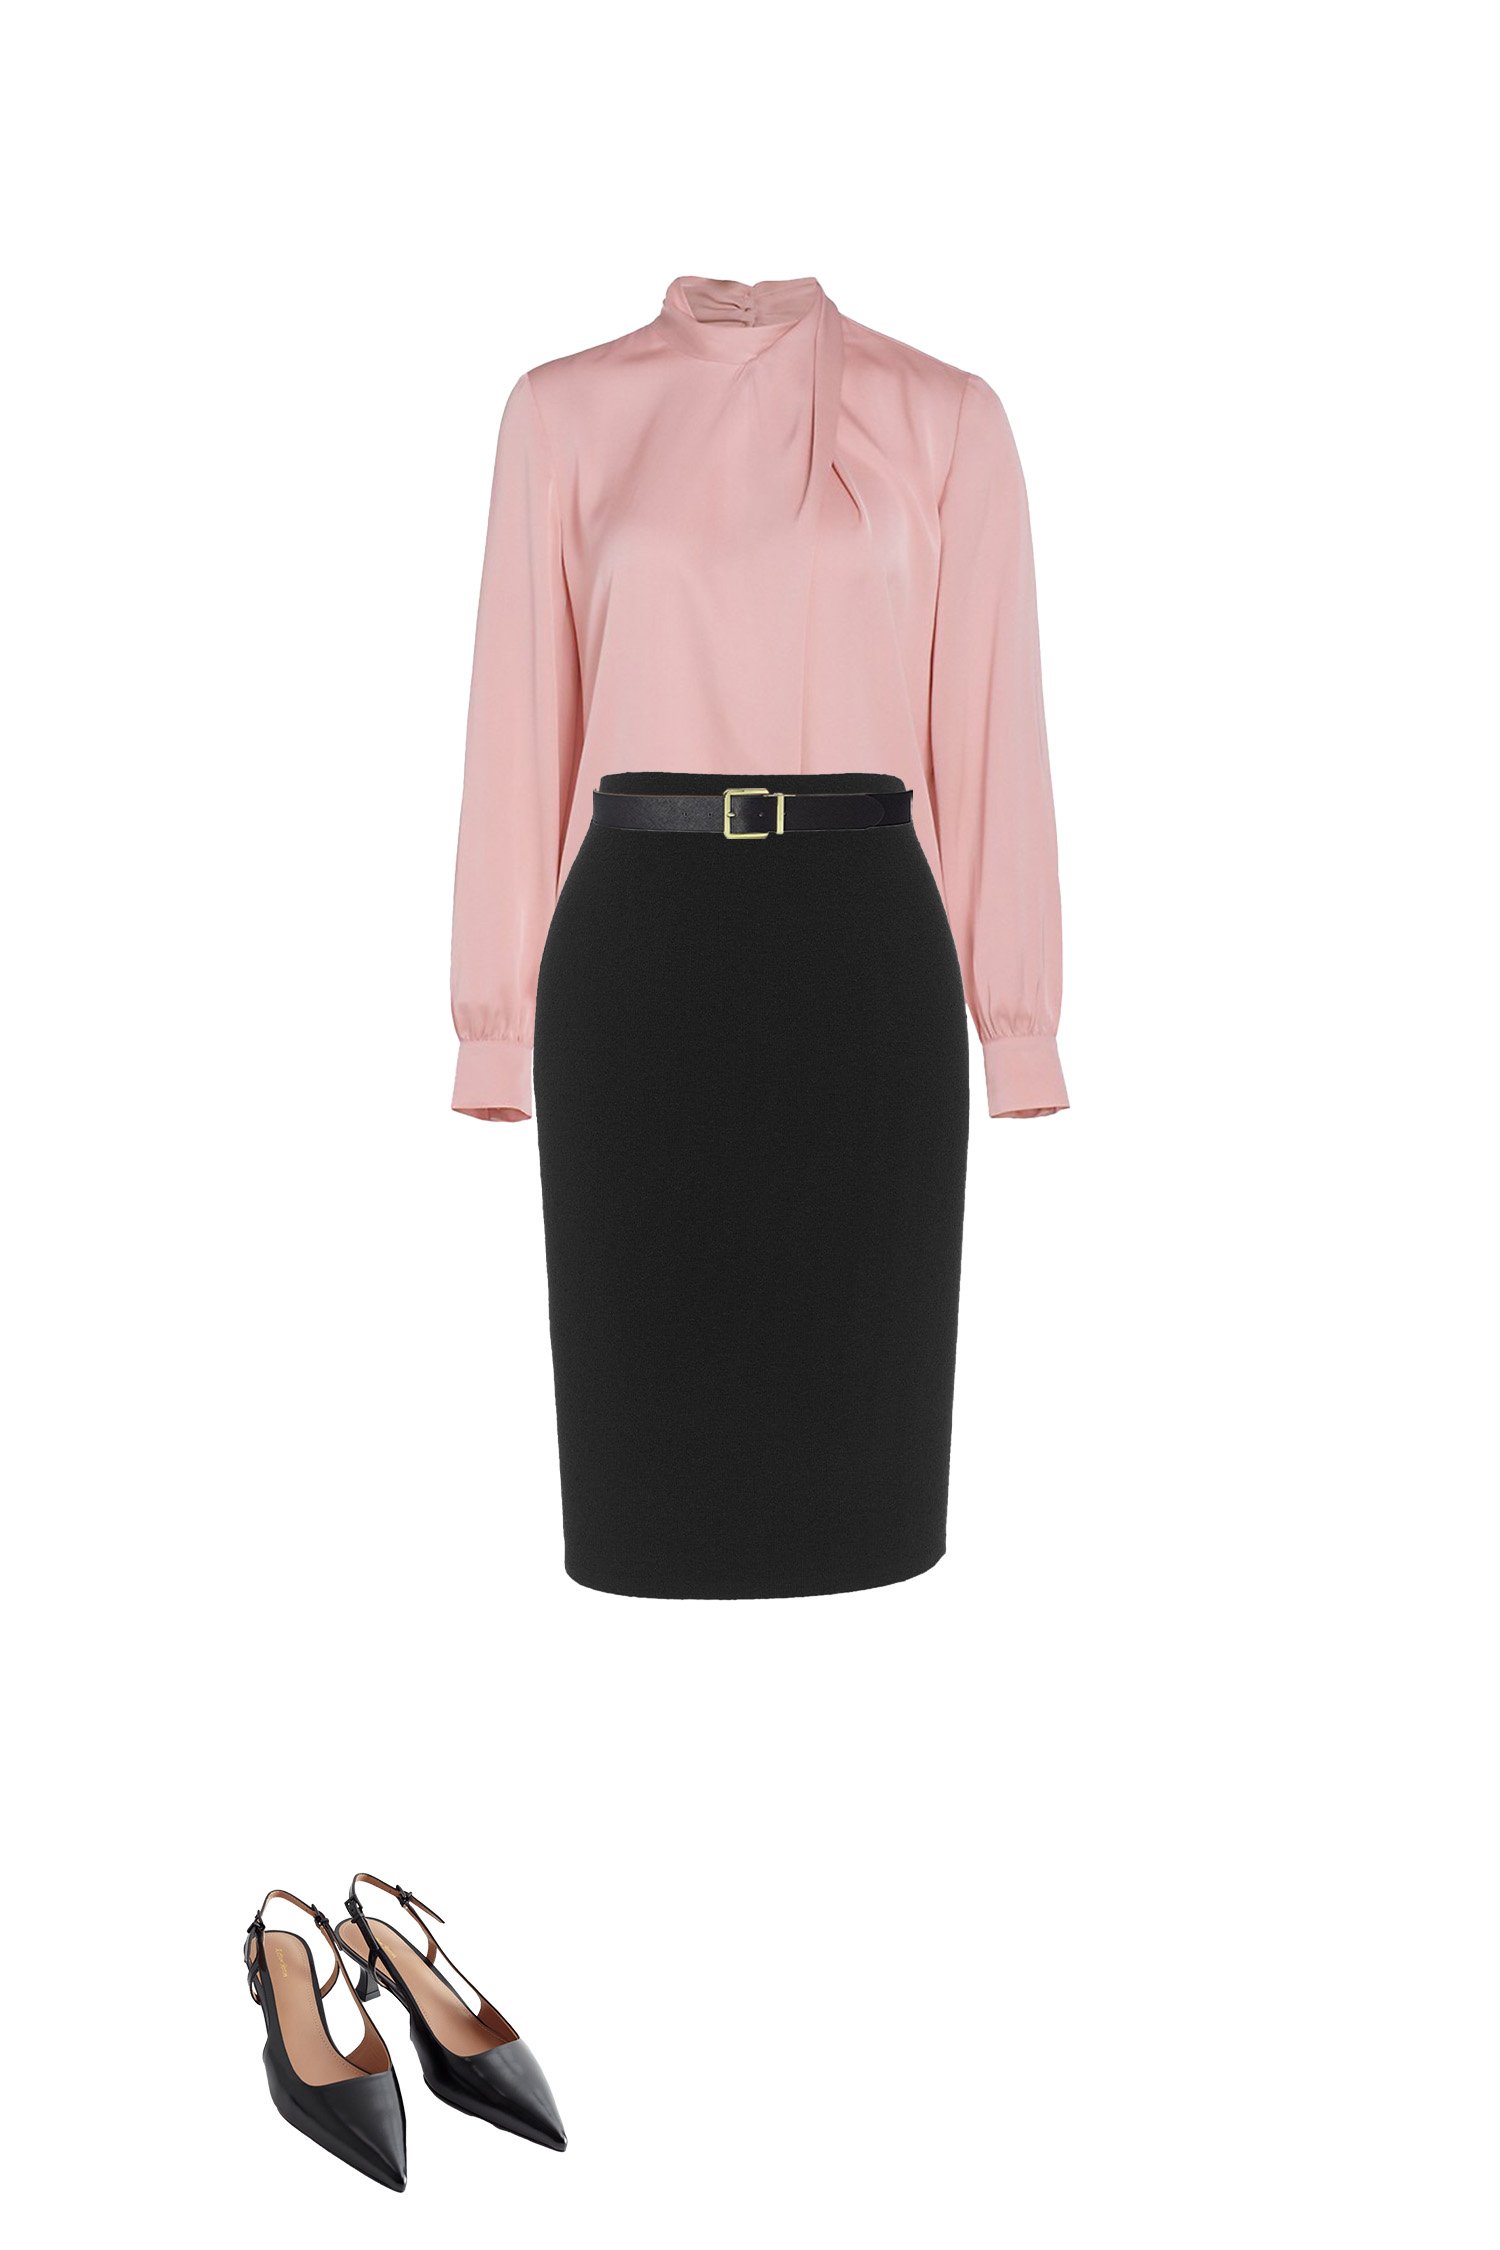 Black Pencil Skirt Outfit with Pink Satin Blouse, Black Belt and Black Pointy Toe Sling-backs